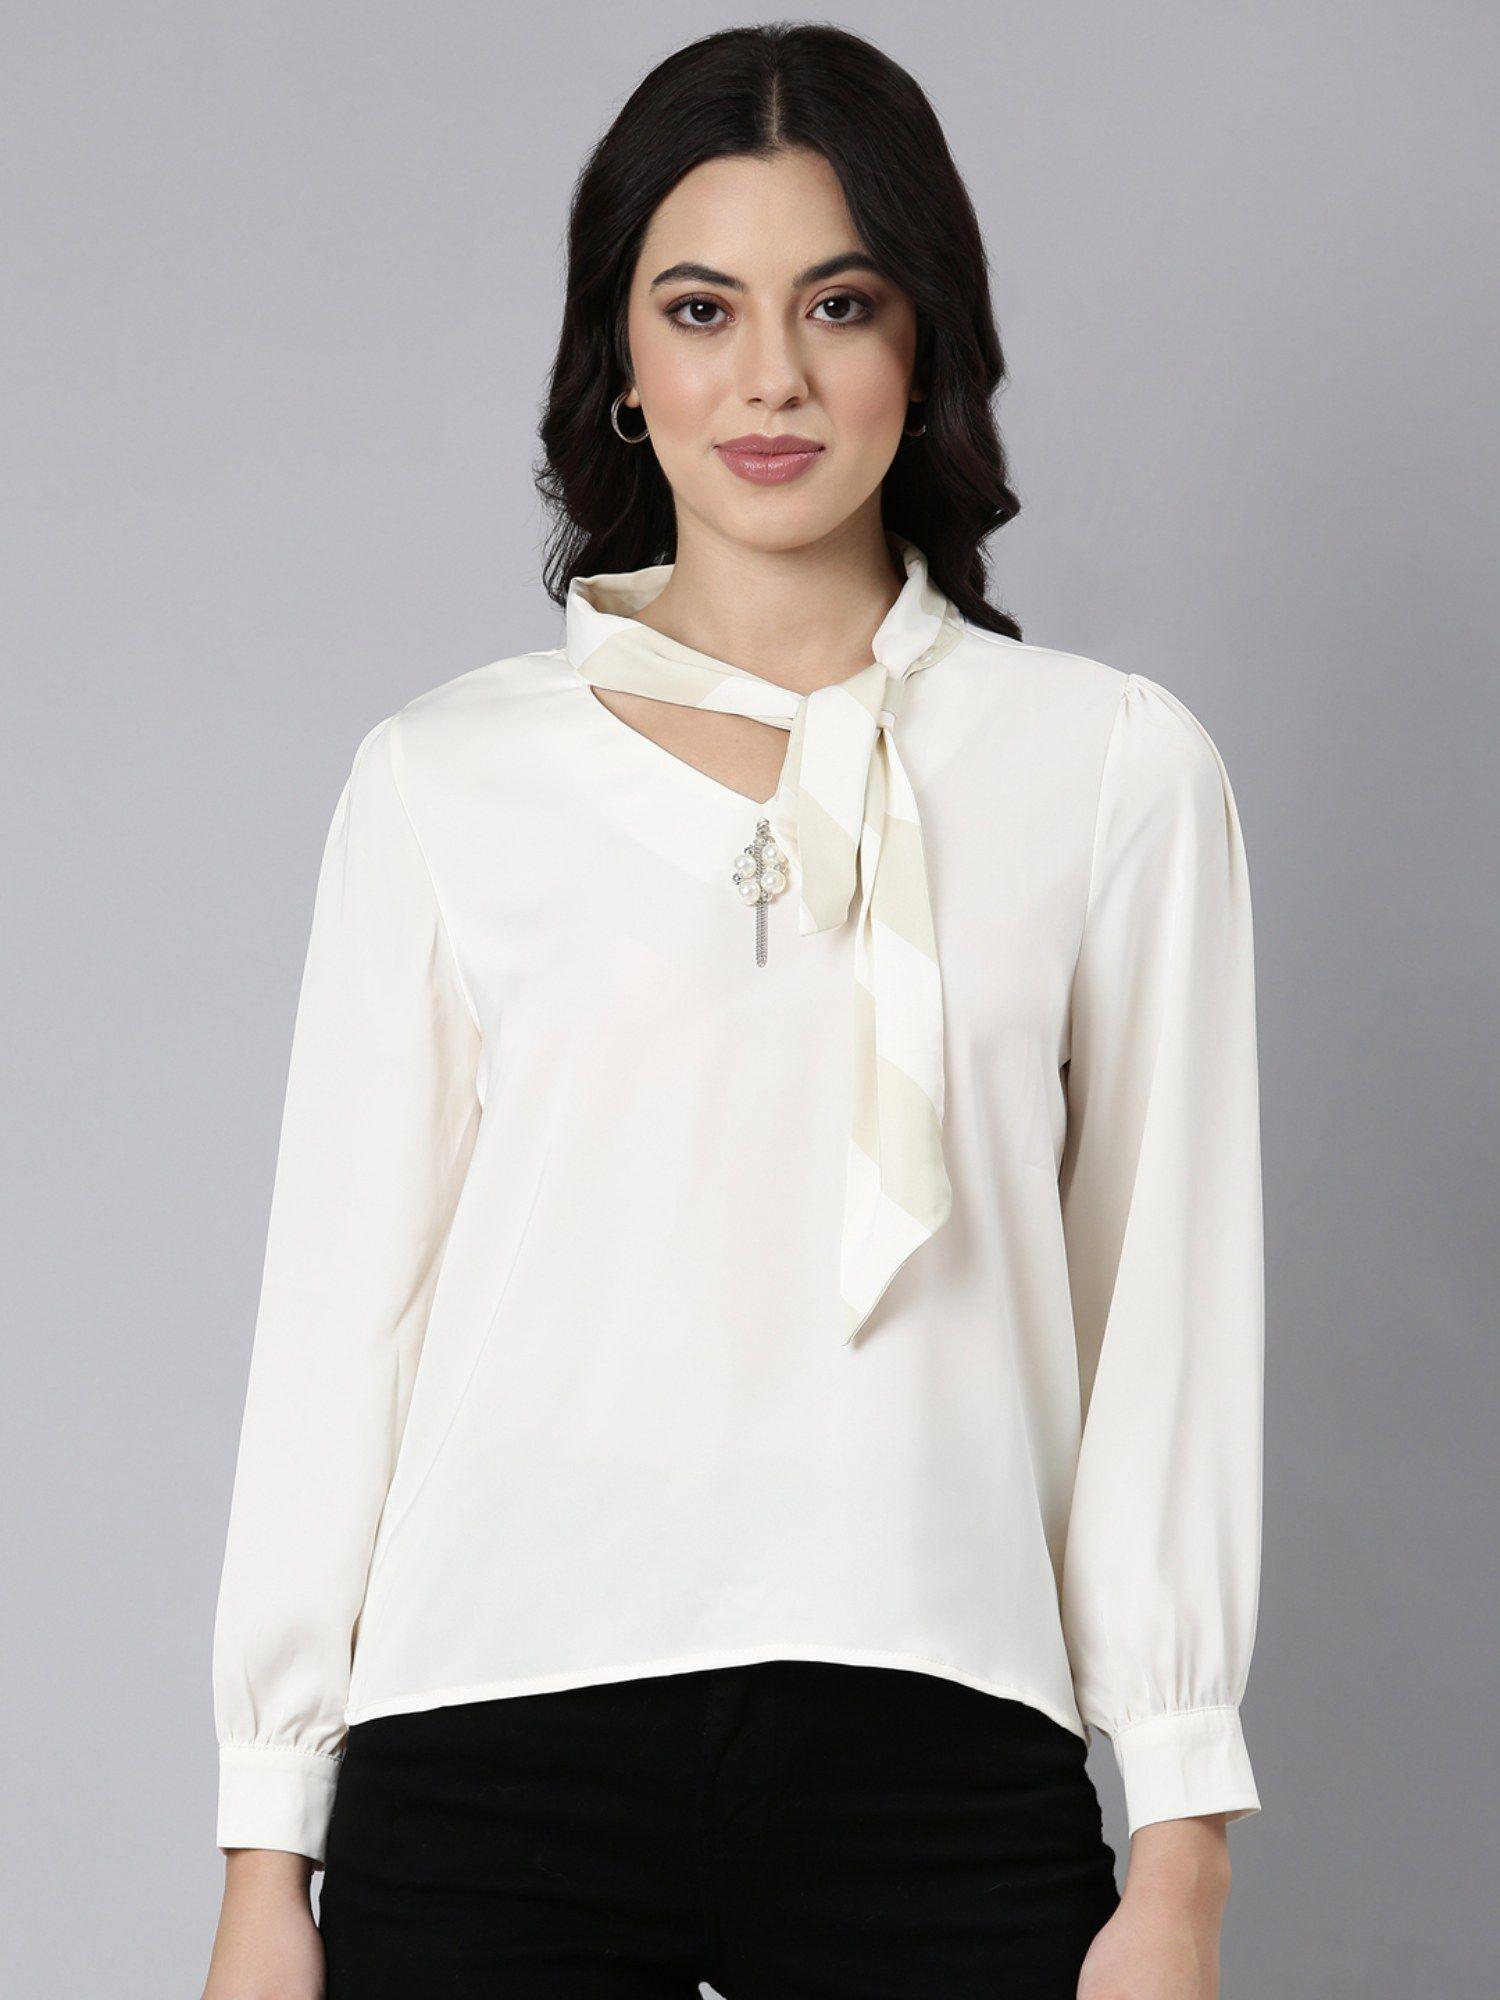 women's tie-up neck solid shirt style cream full sleeves top